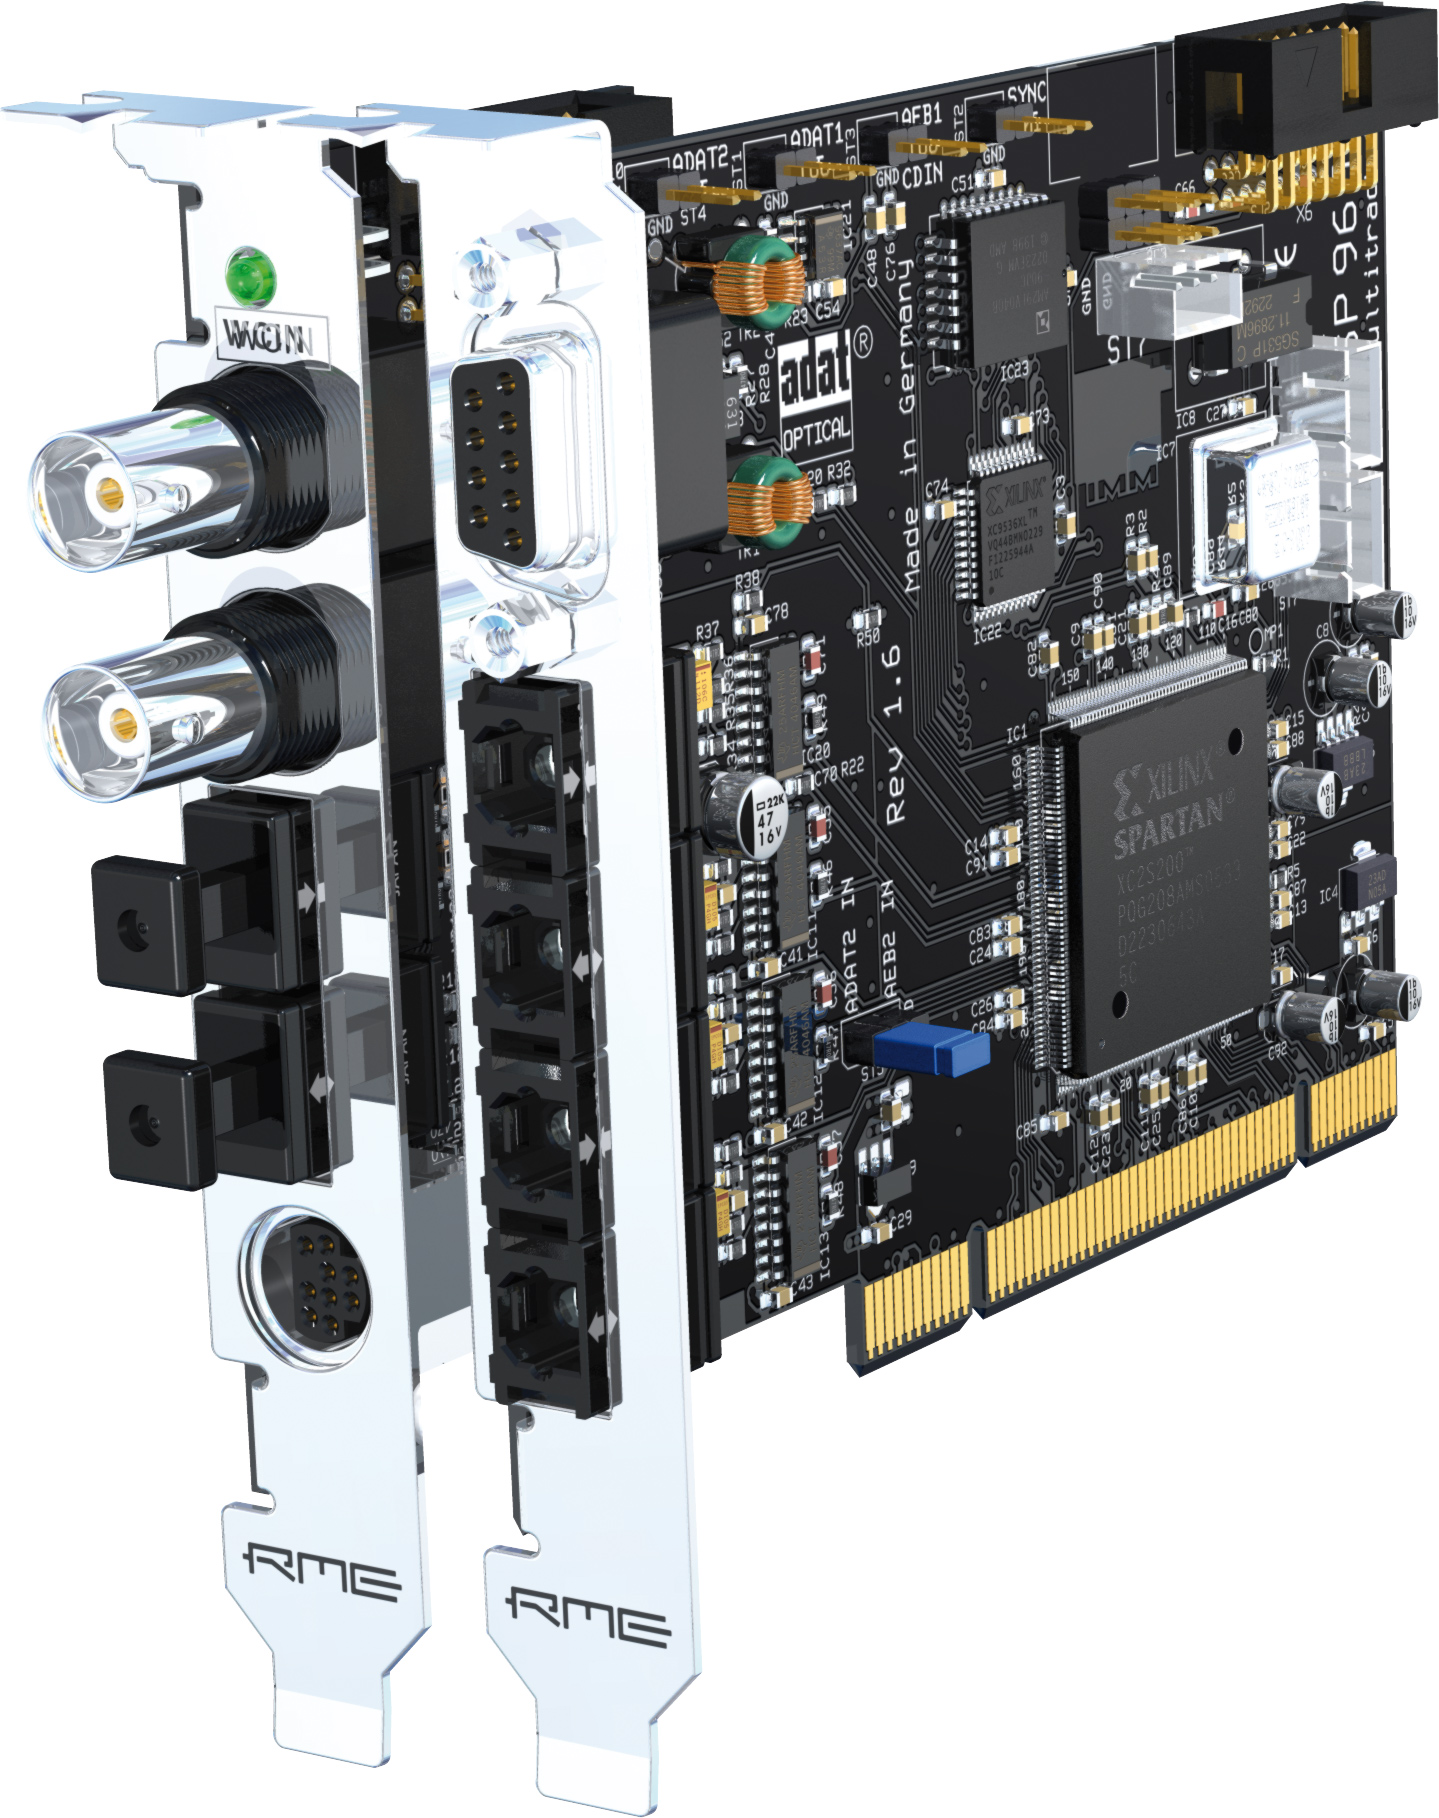 Rme Hdsp9652 Pci Adat 52 Canaux 96khz - Andere formate (madi, dante, pci...) - Variation 1